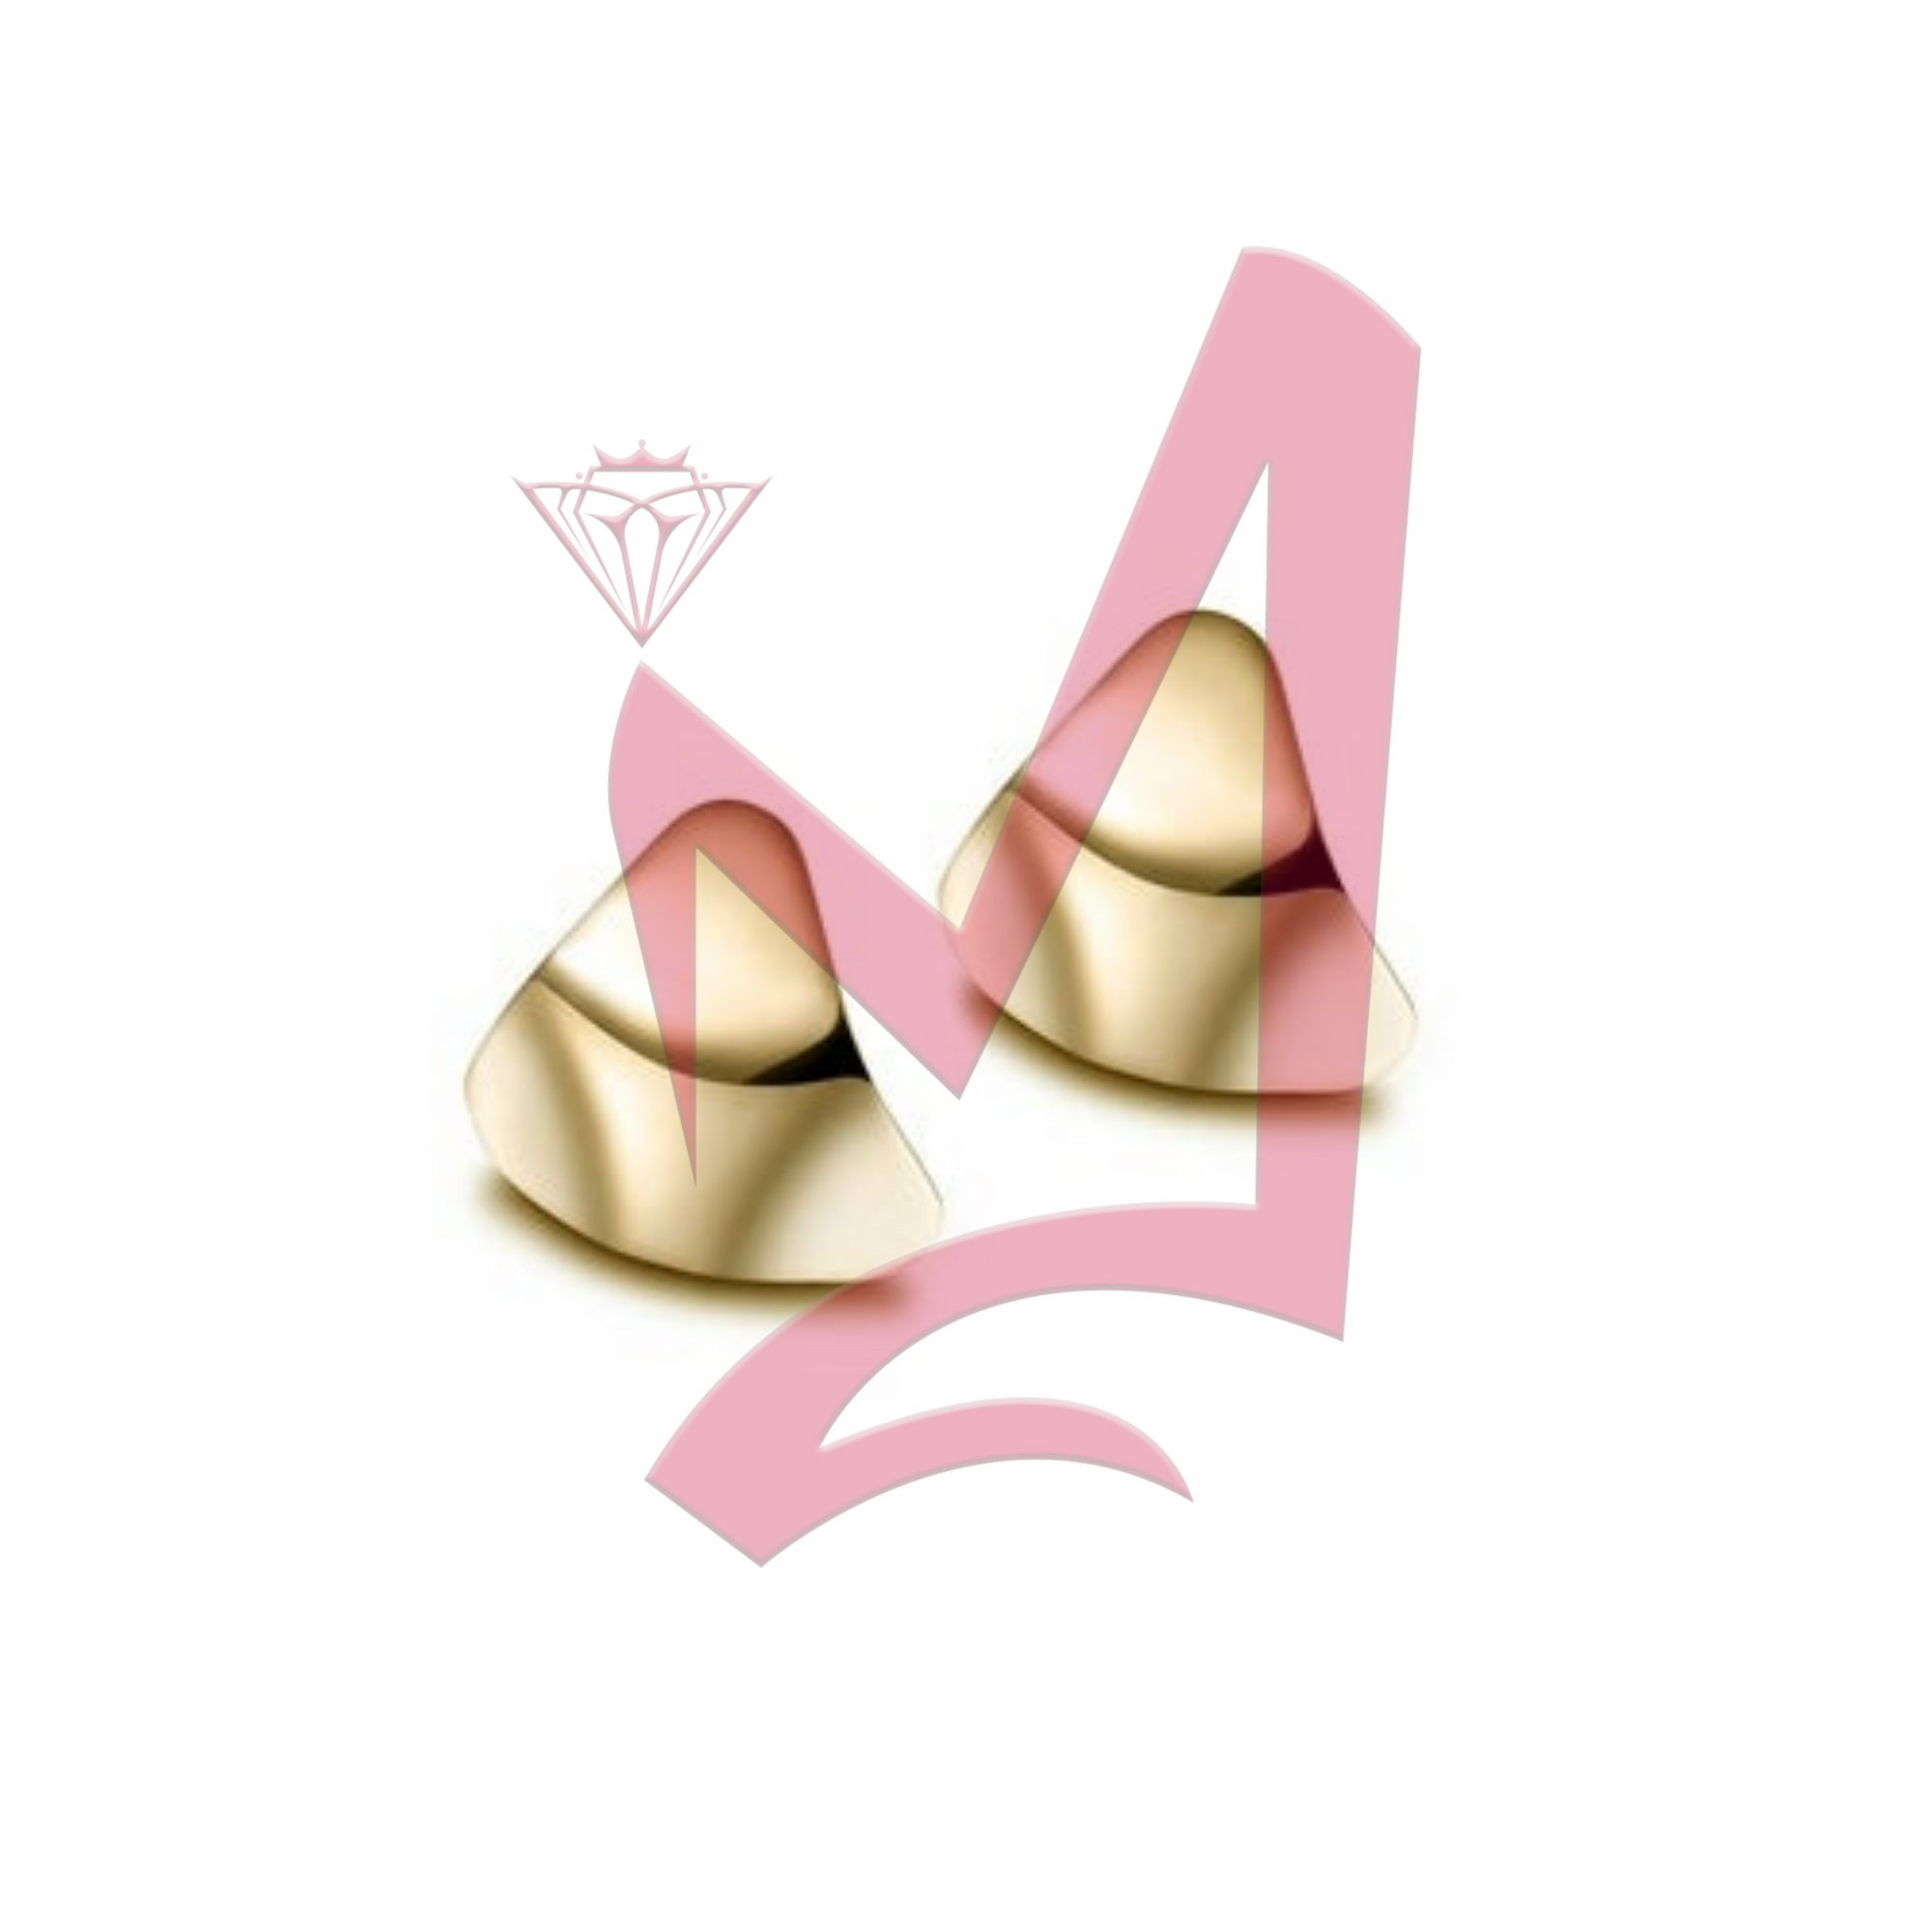 Curved Triangle in 14K Plated Gold Earrings